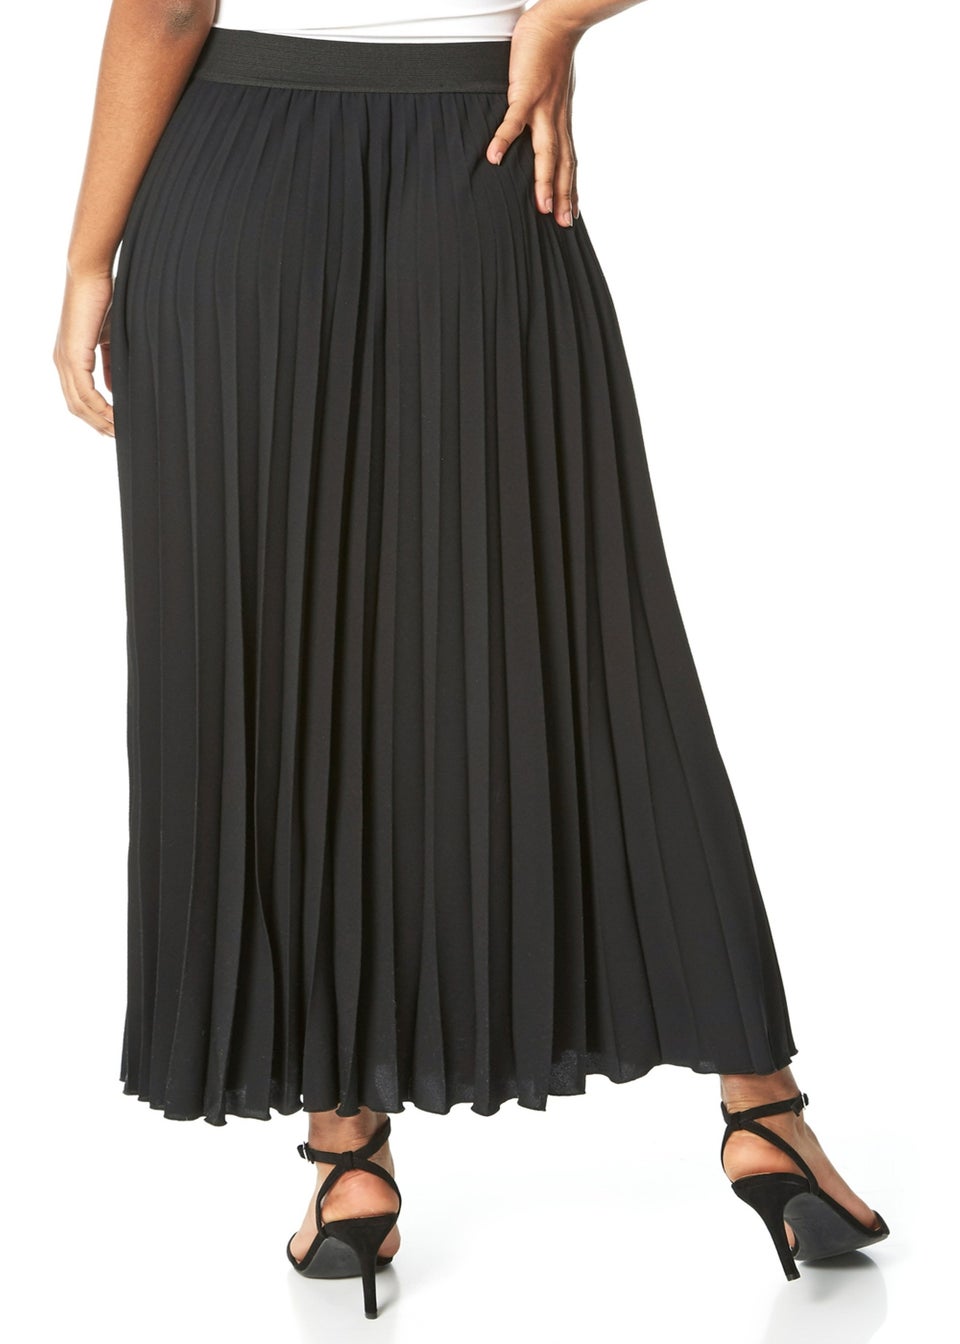 Long Skirts, Maxi Skirts For Women